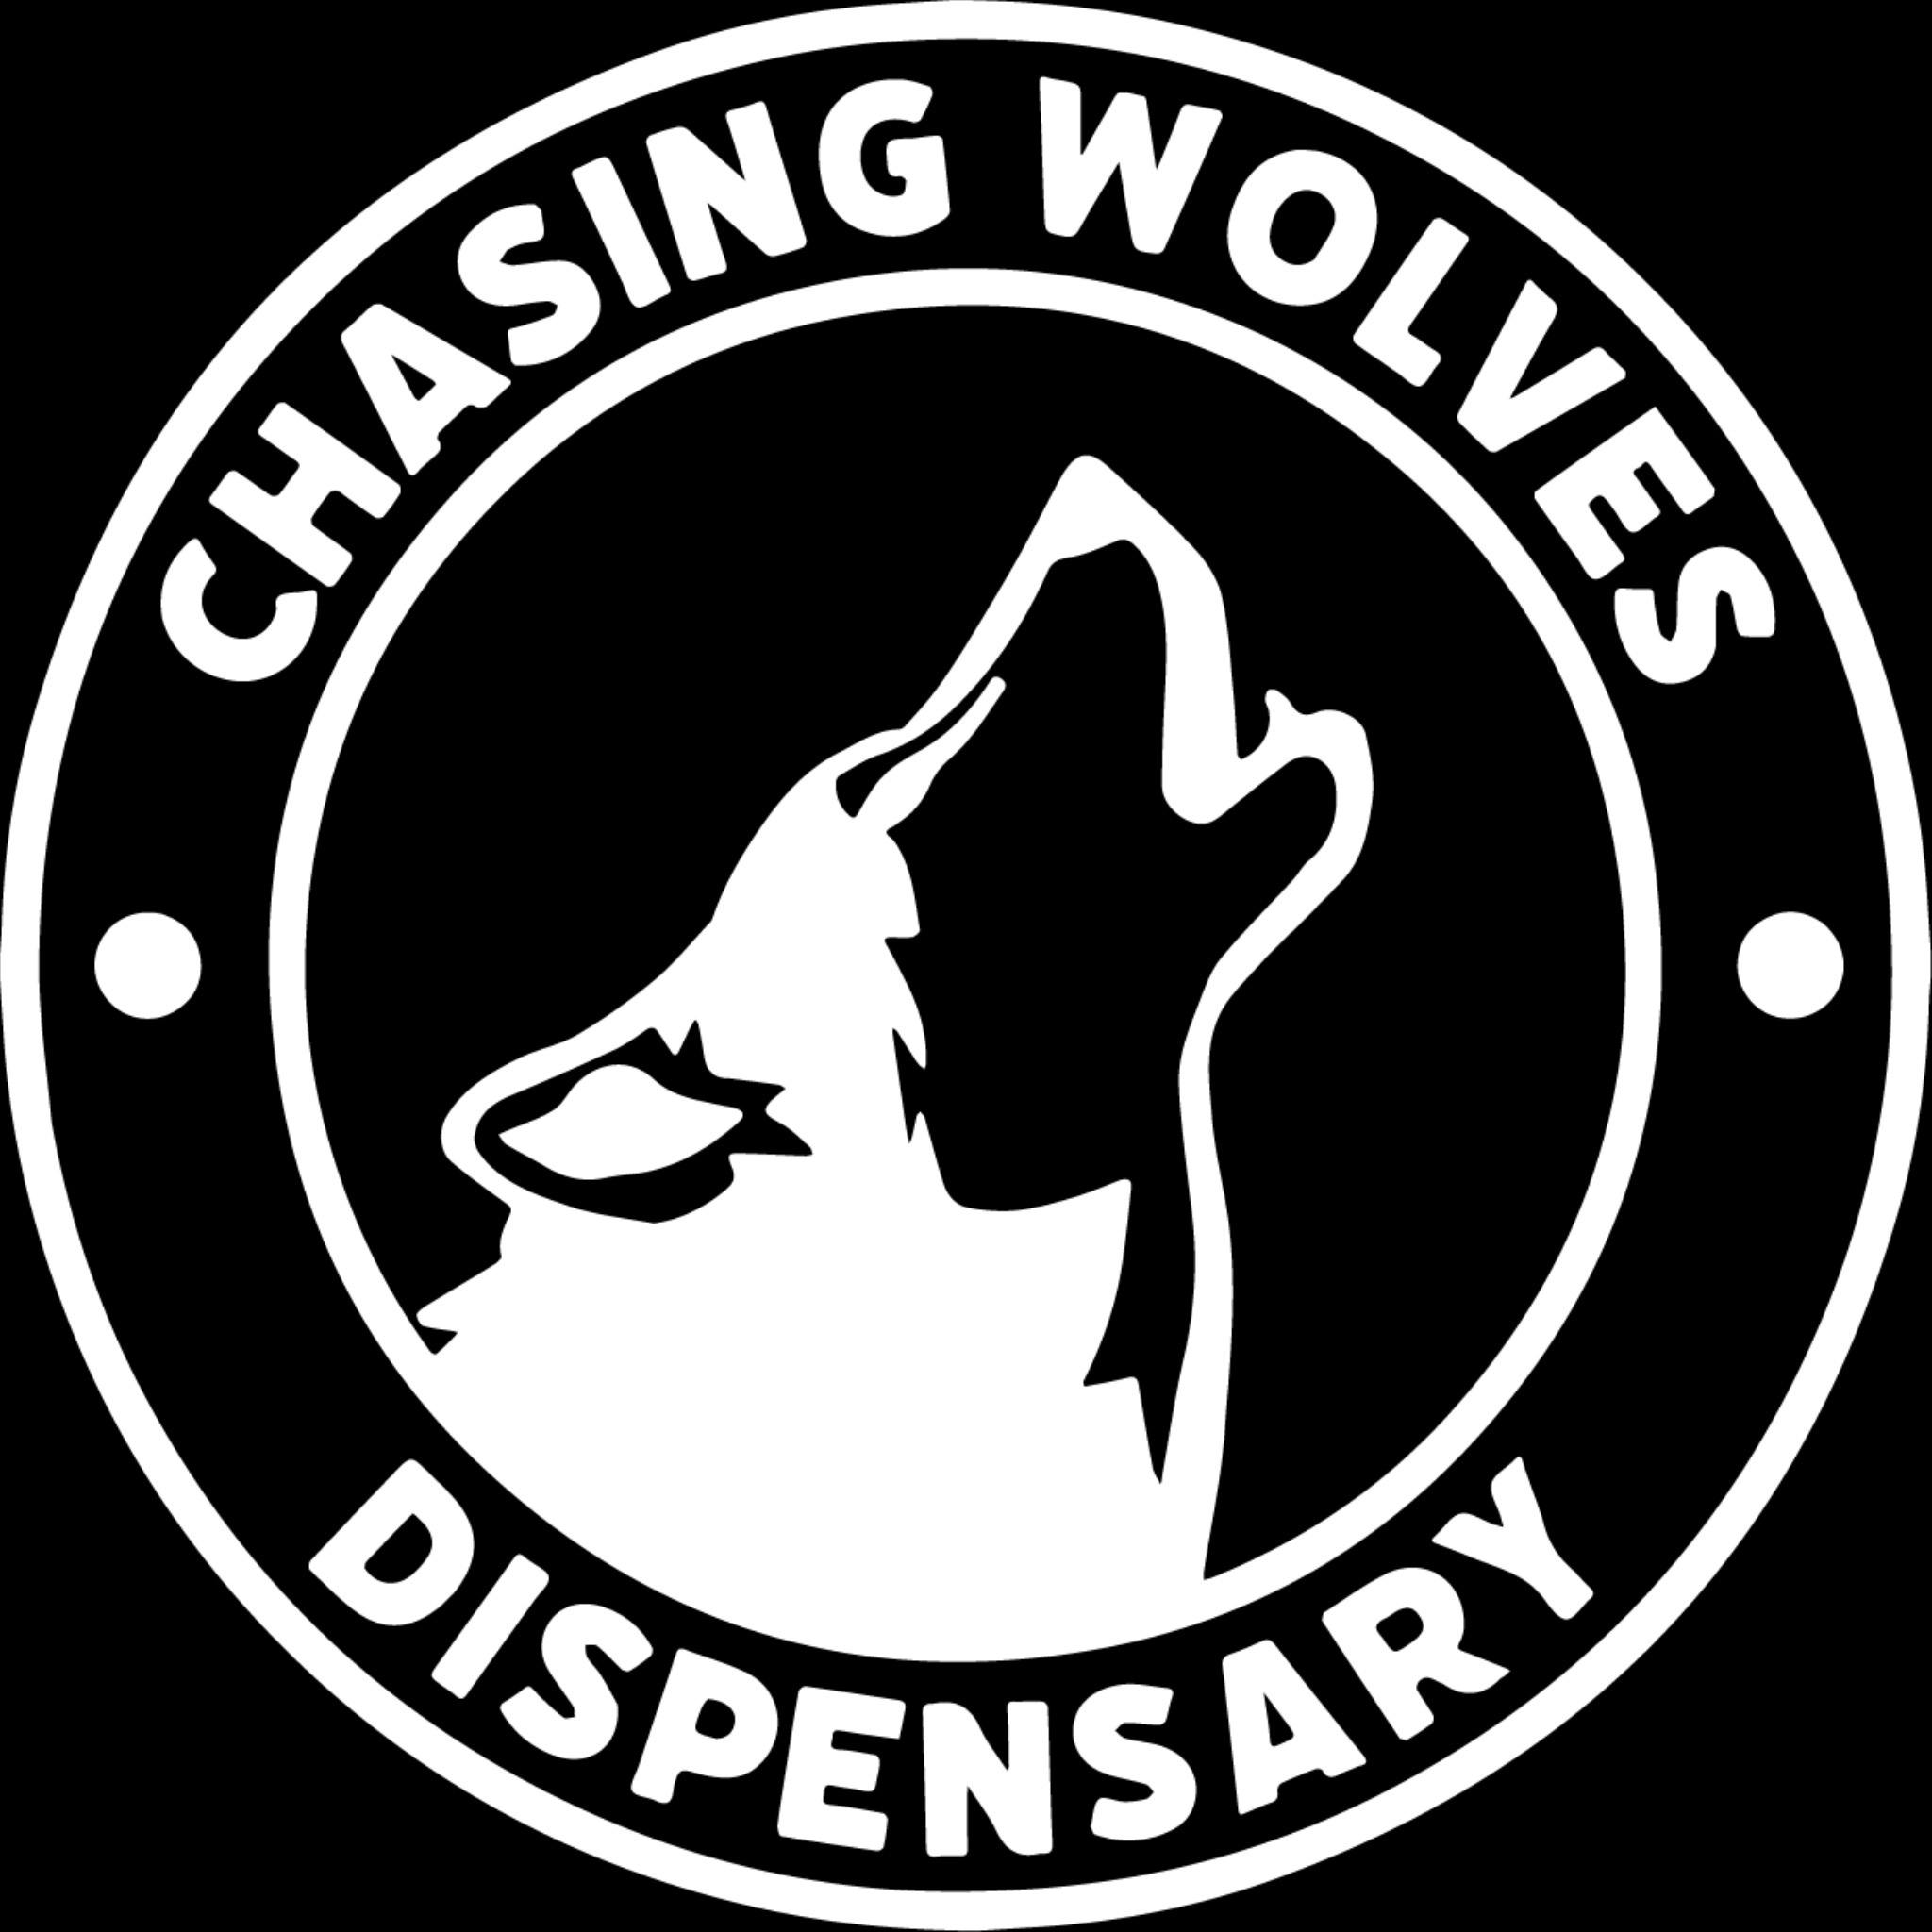 Chasing Wolves Dispensary